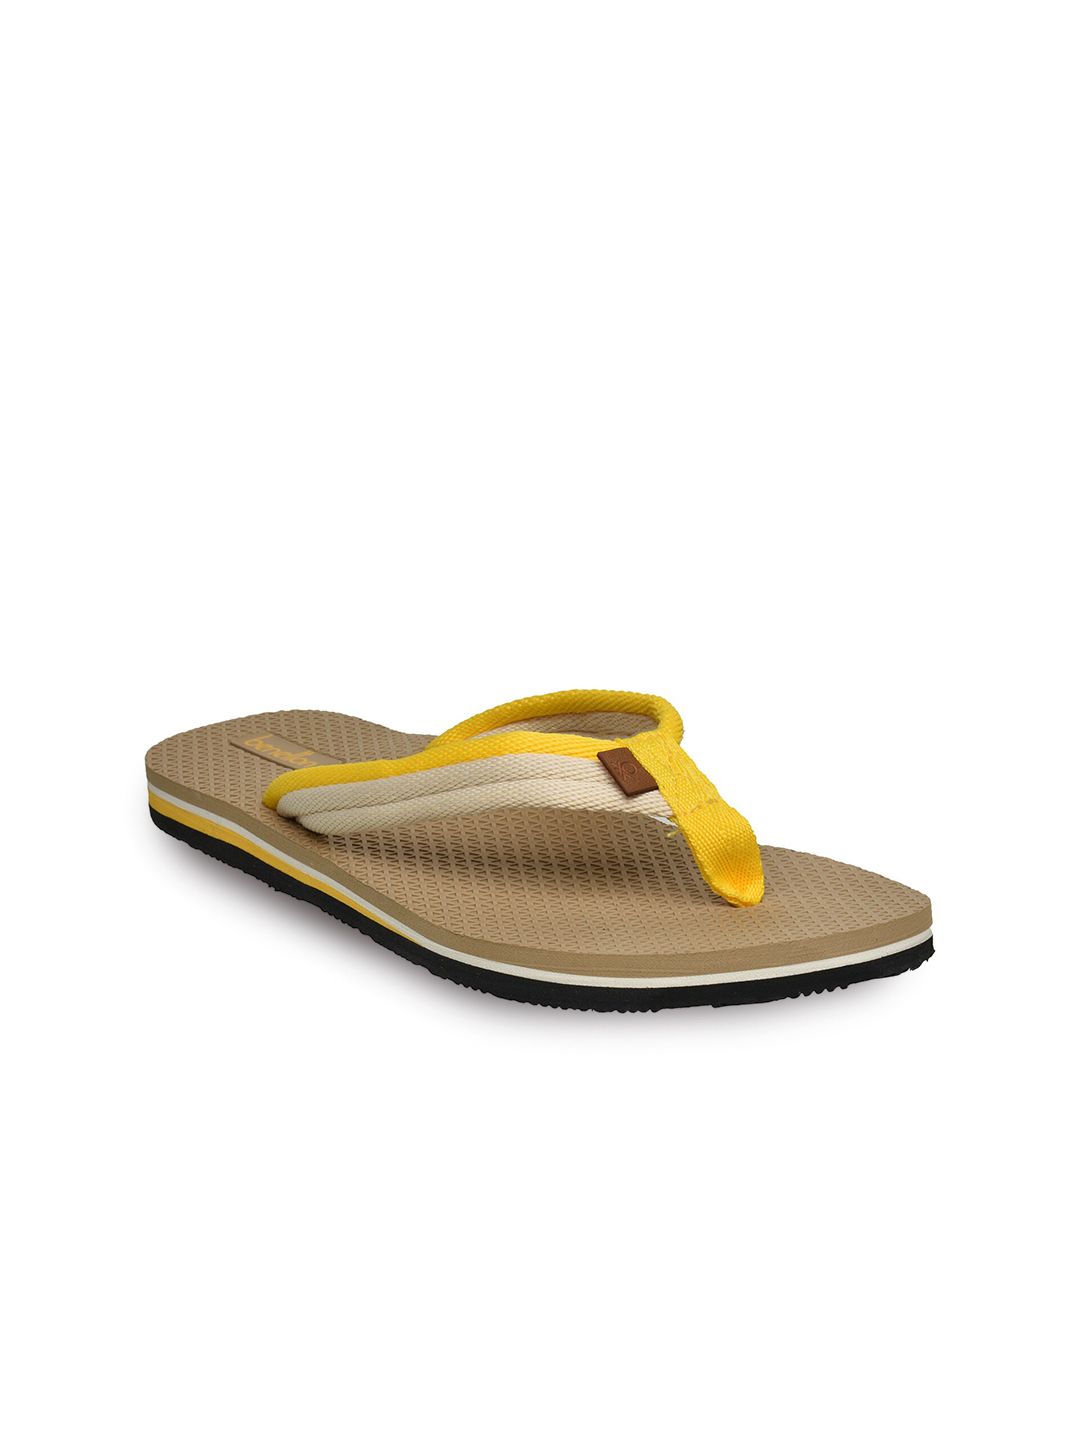 United Colors of Benetton Women Yellow & Beige Thong Flip-Flops Price in India